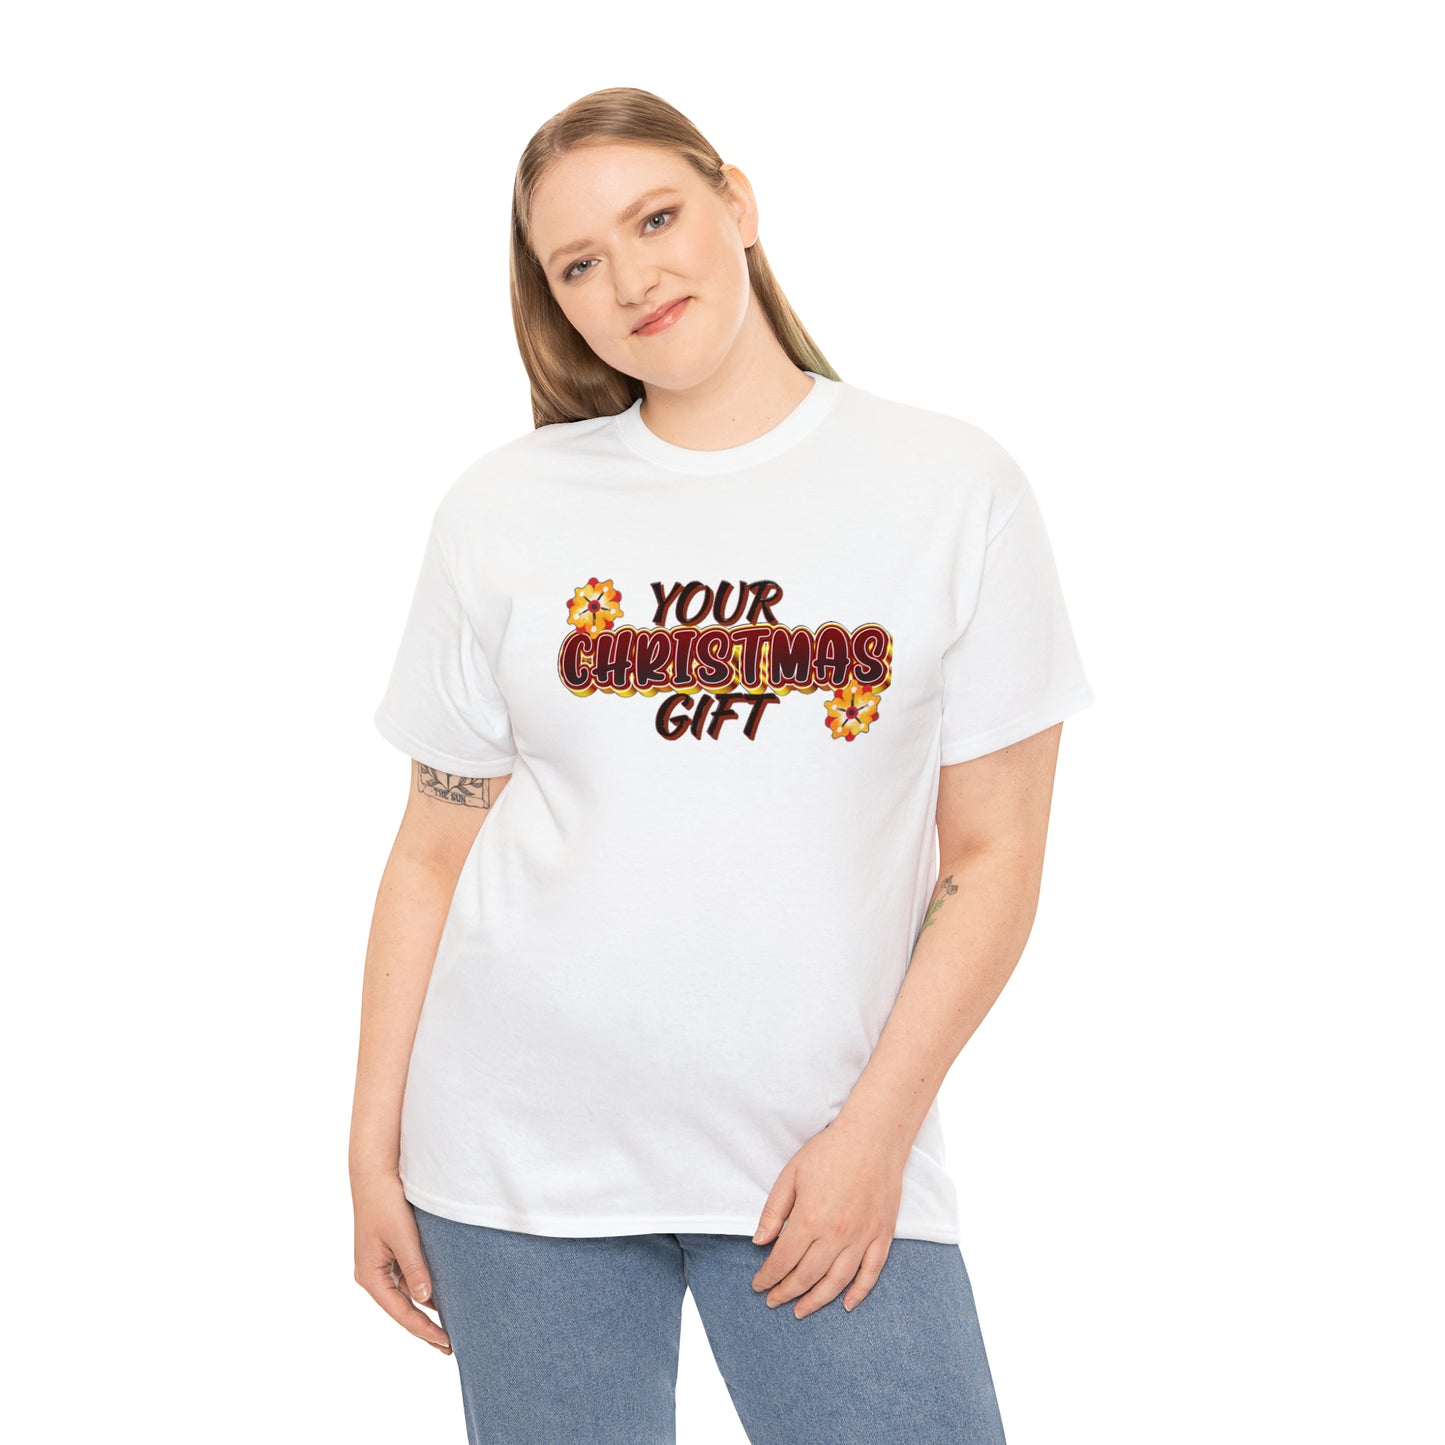 Your Christmas Gift - Heavy Cotton Tee for Men and Women